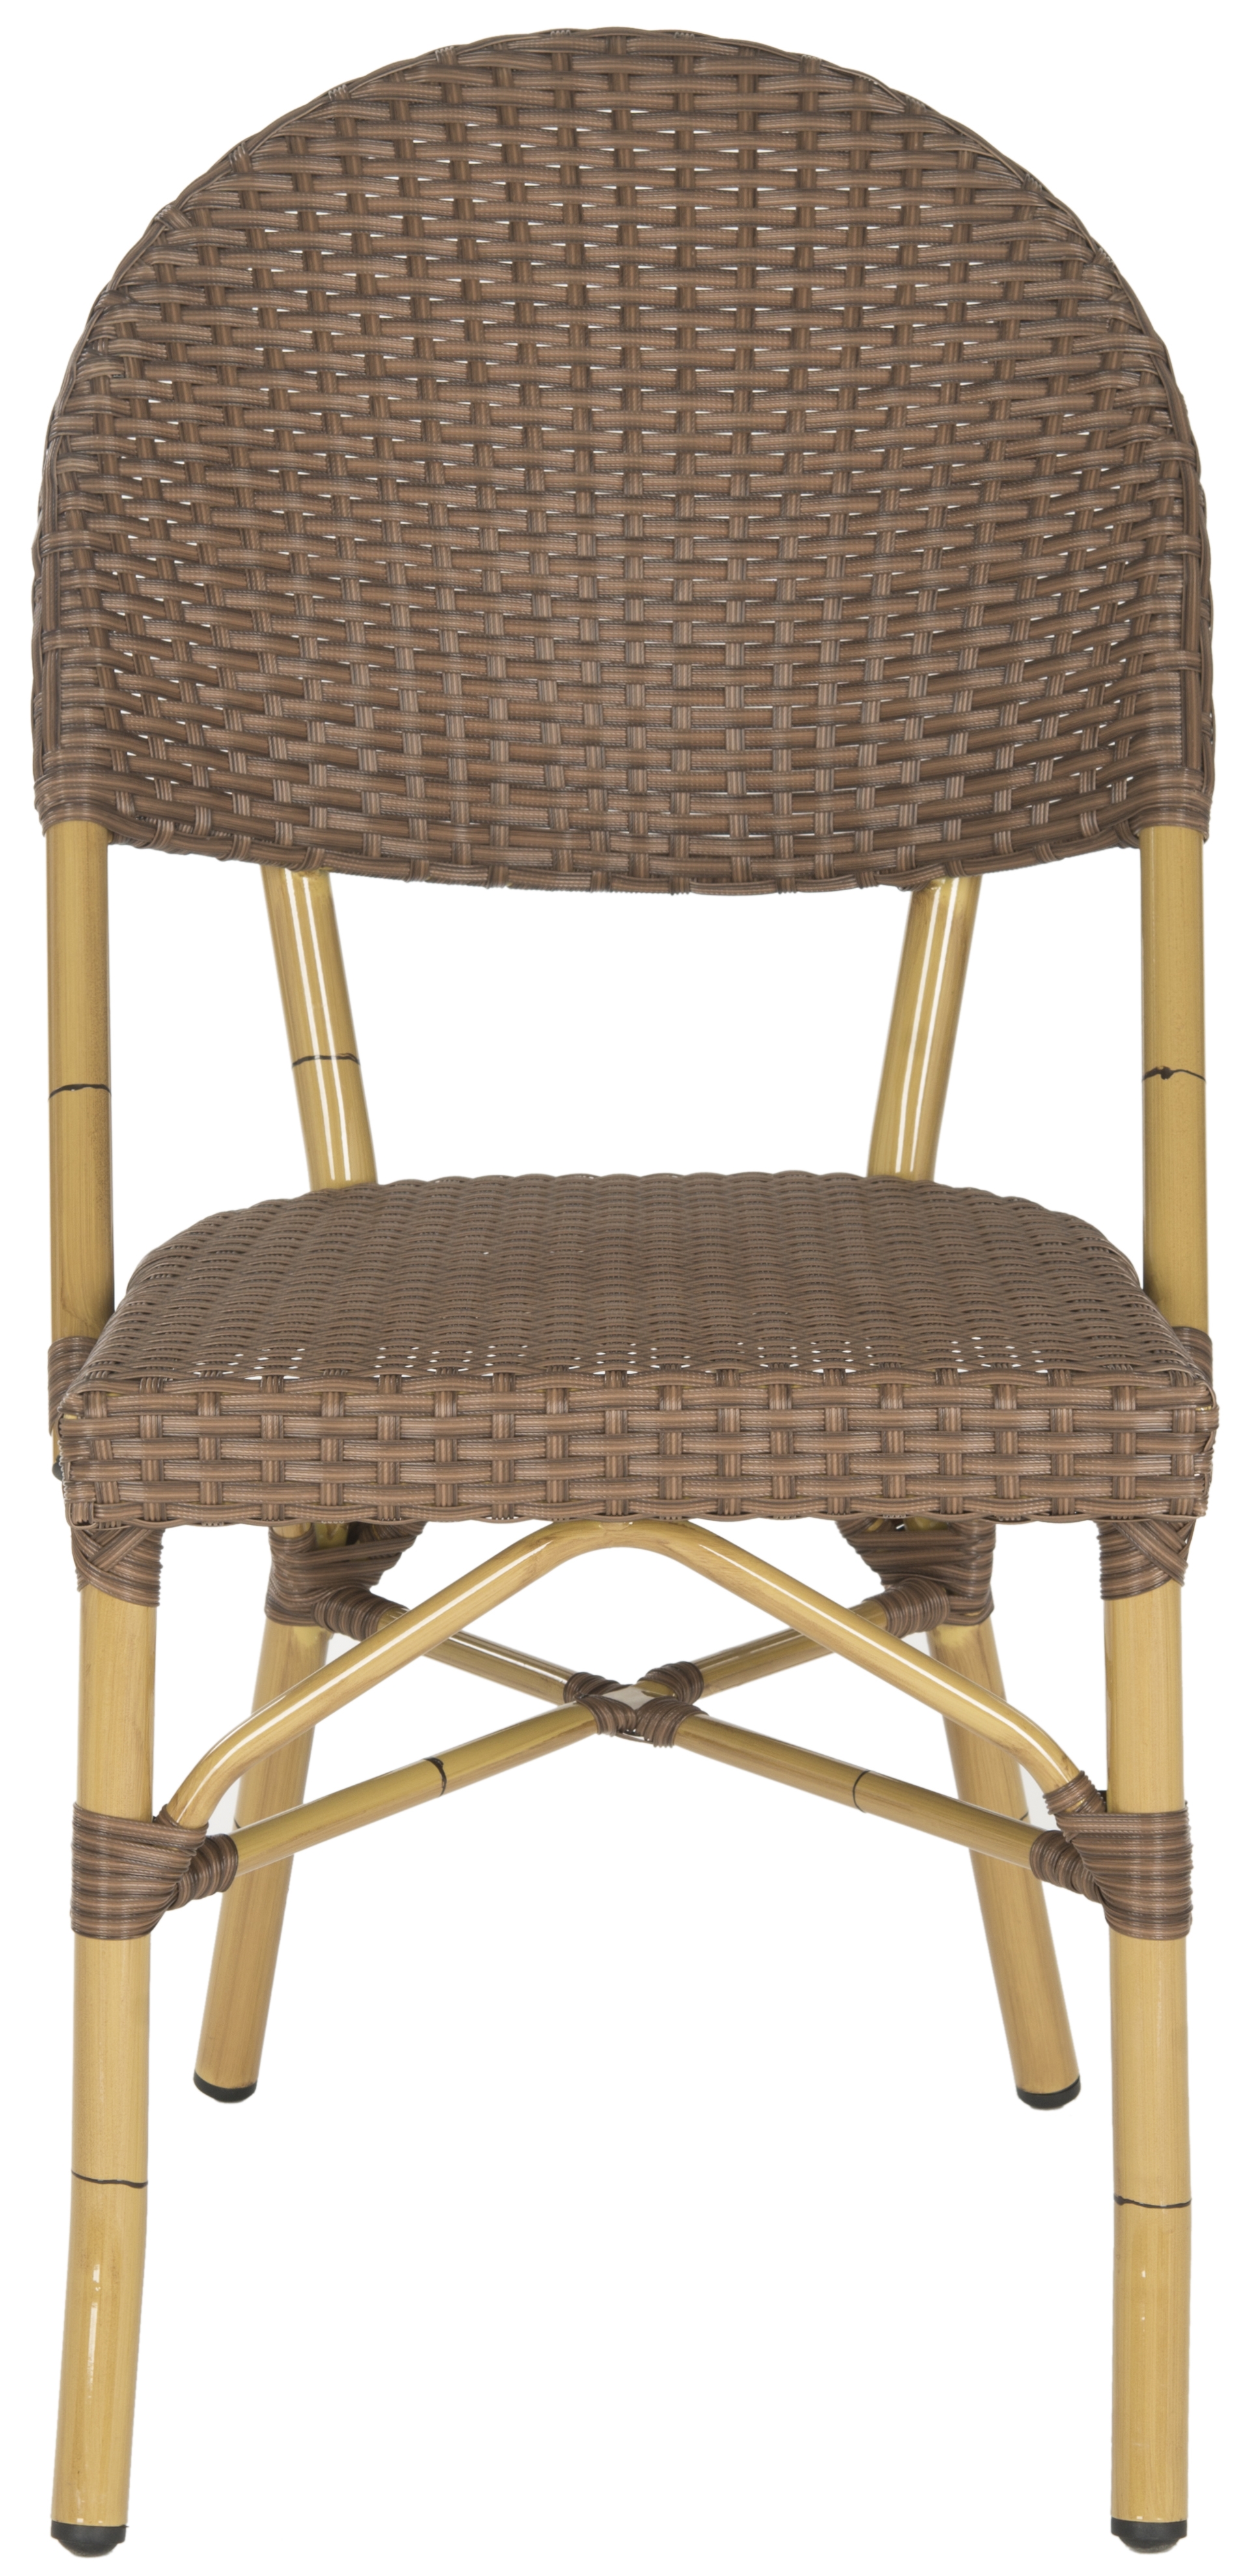 Barrow Stacking Indoor-Outdoor Side Chair - Brown - Arlo Home - Image 1